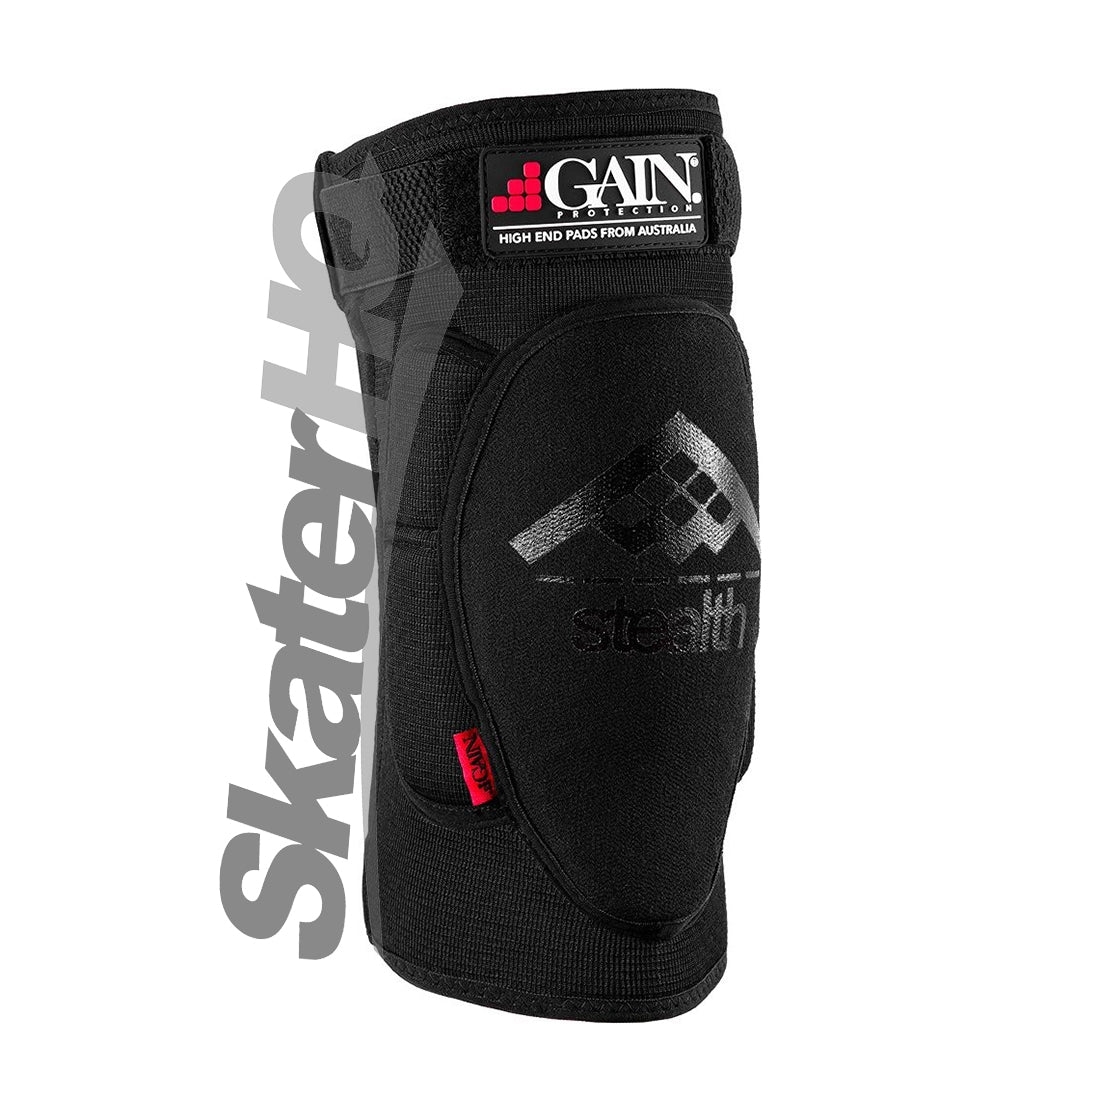 GAIN Stealth Knee Pads - Black - S Protective Gear